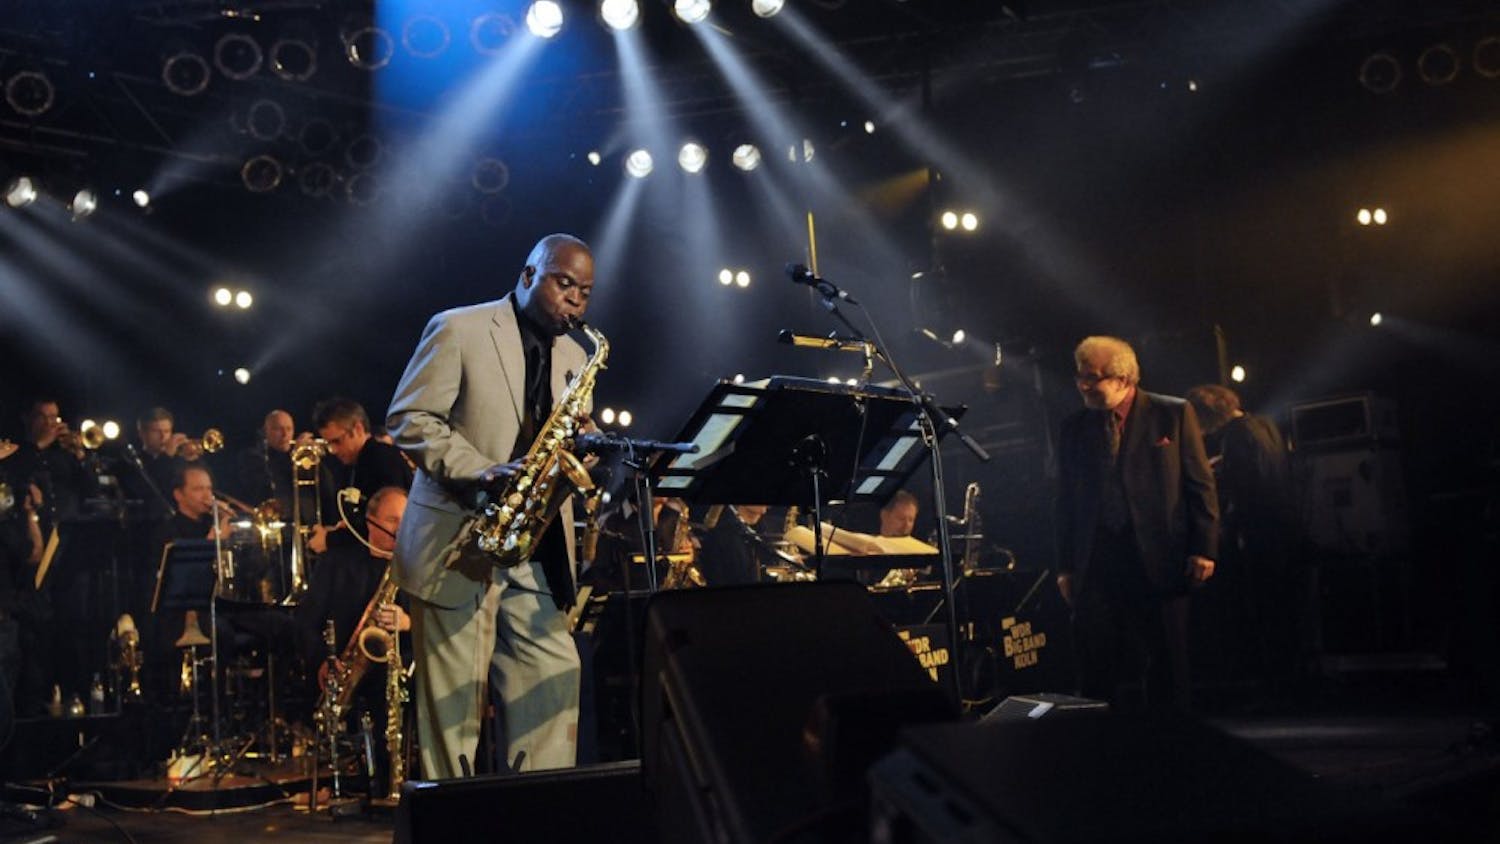 Maceo Parker performed Saturday in Buskirk-Chumley Theater. The American funk and soul jazz saxophonist performed with his own ensemble this weekend though, throughout his career, he has played alongside names such as James Brown, George Clinton and Prince.